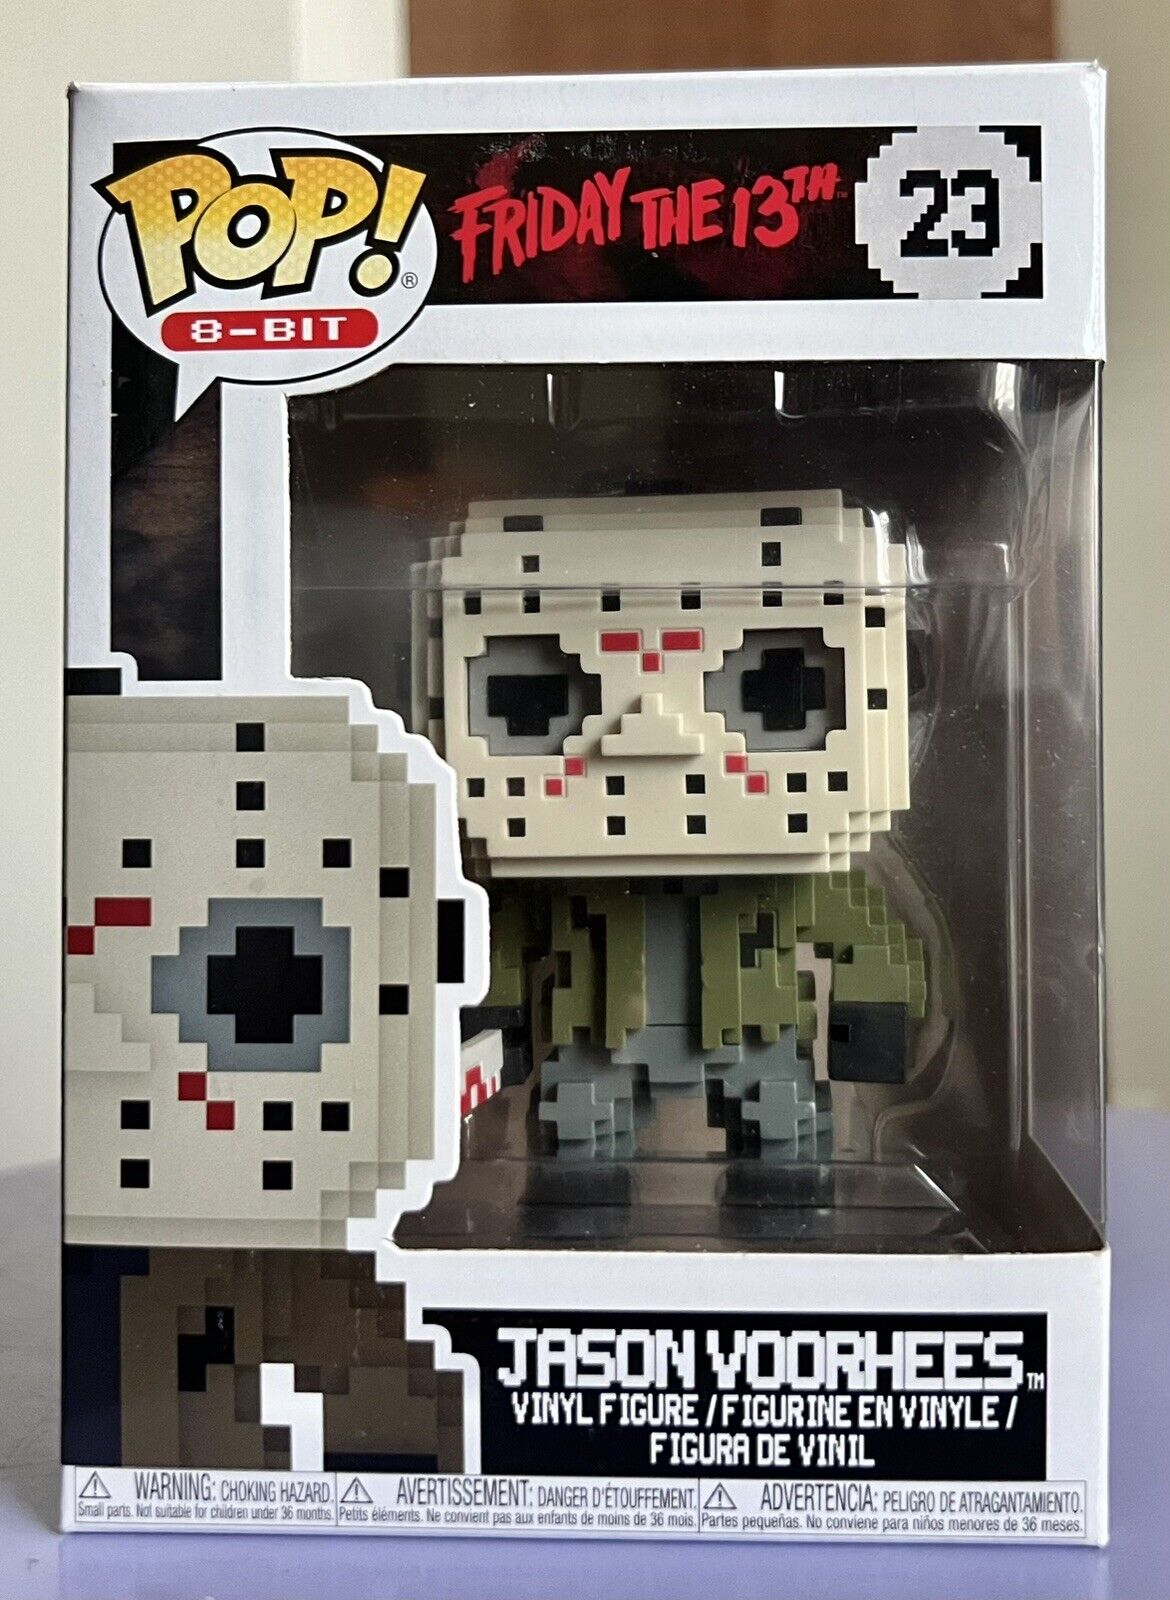 VAULTED Funko Pop 8-Bit: JASON VOORHEES #23 (Friday the 13th Series) w/Protector